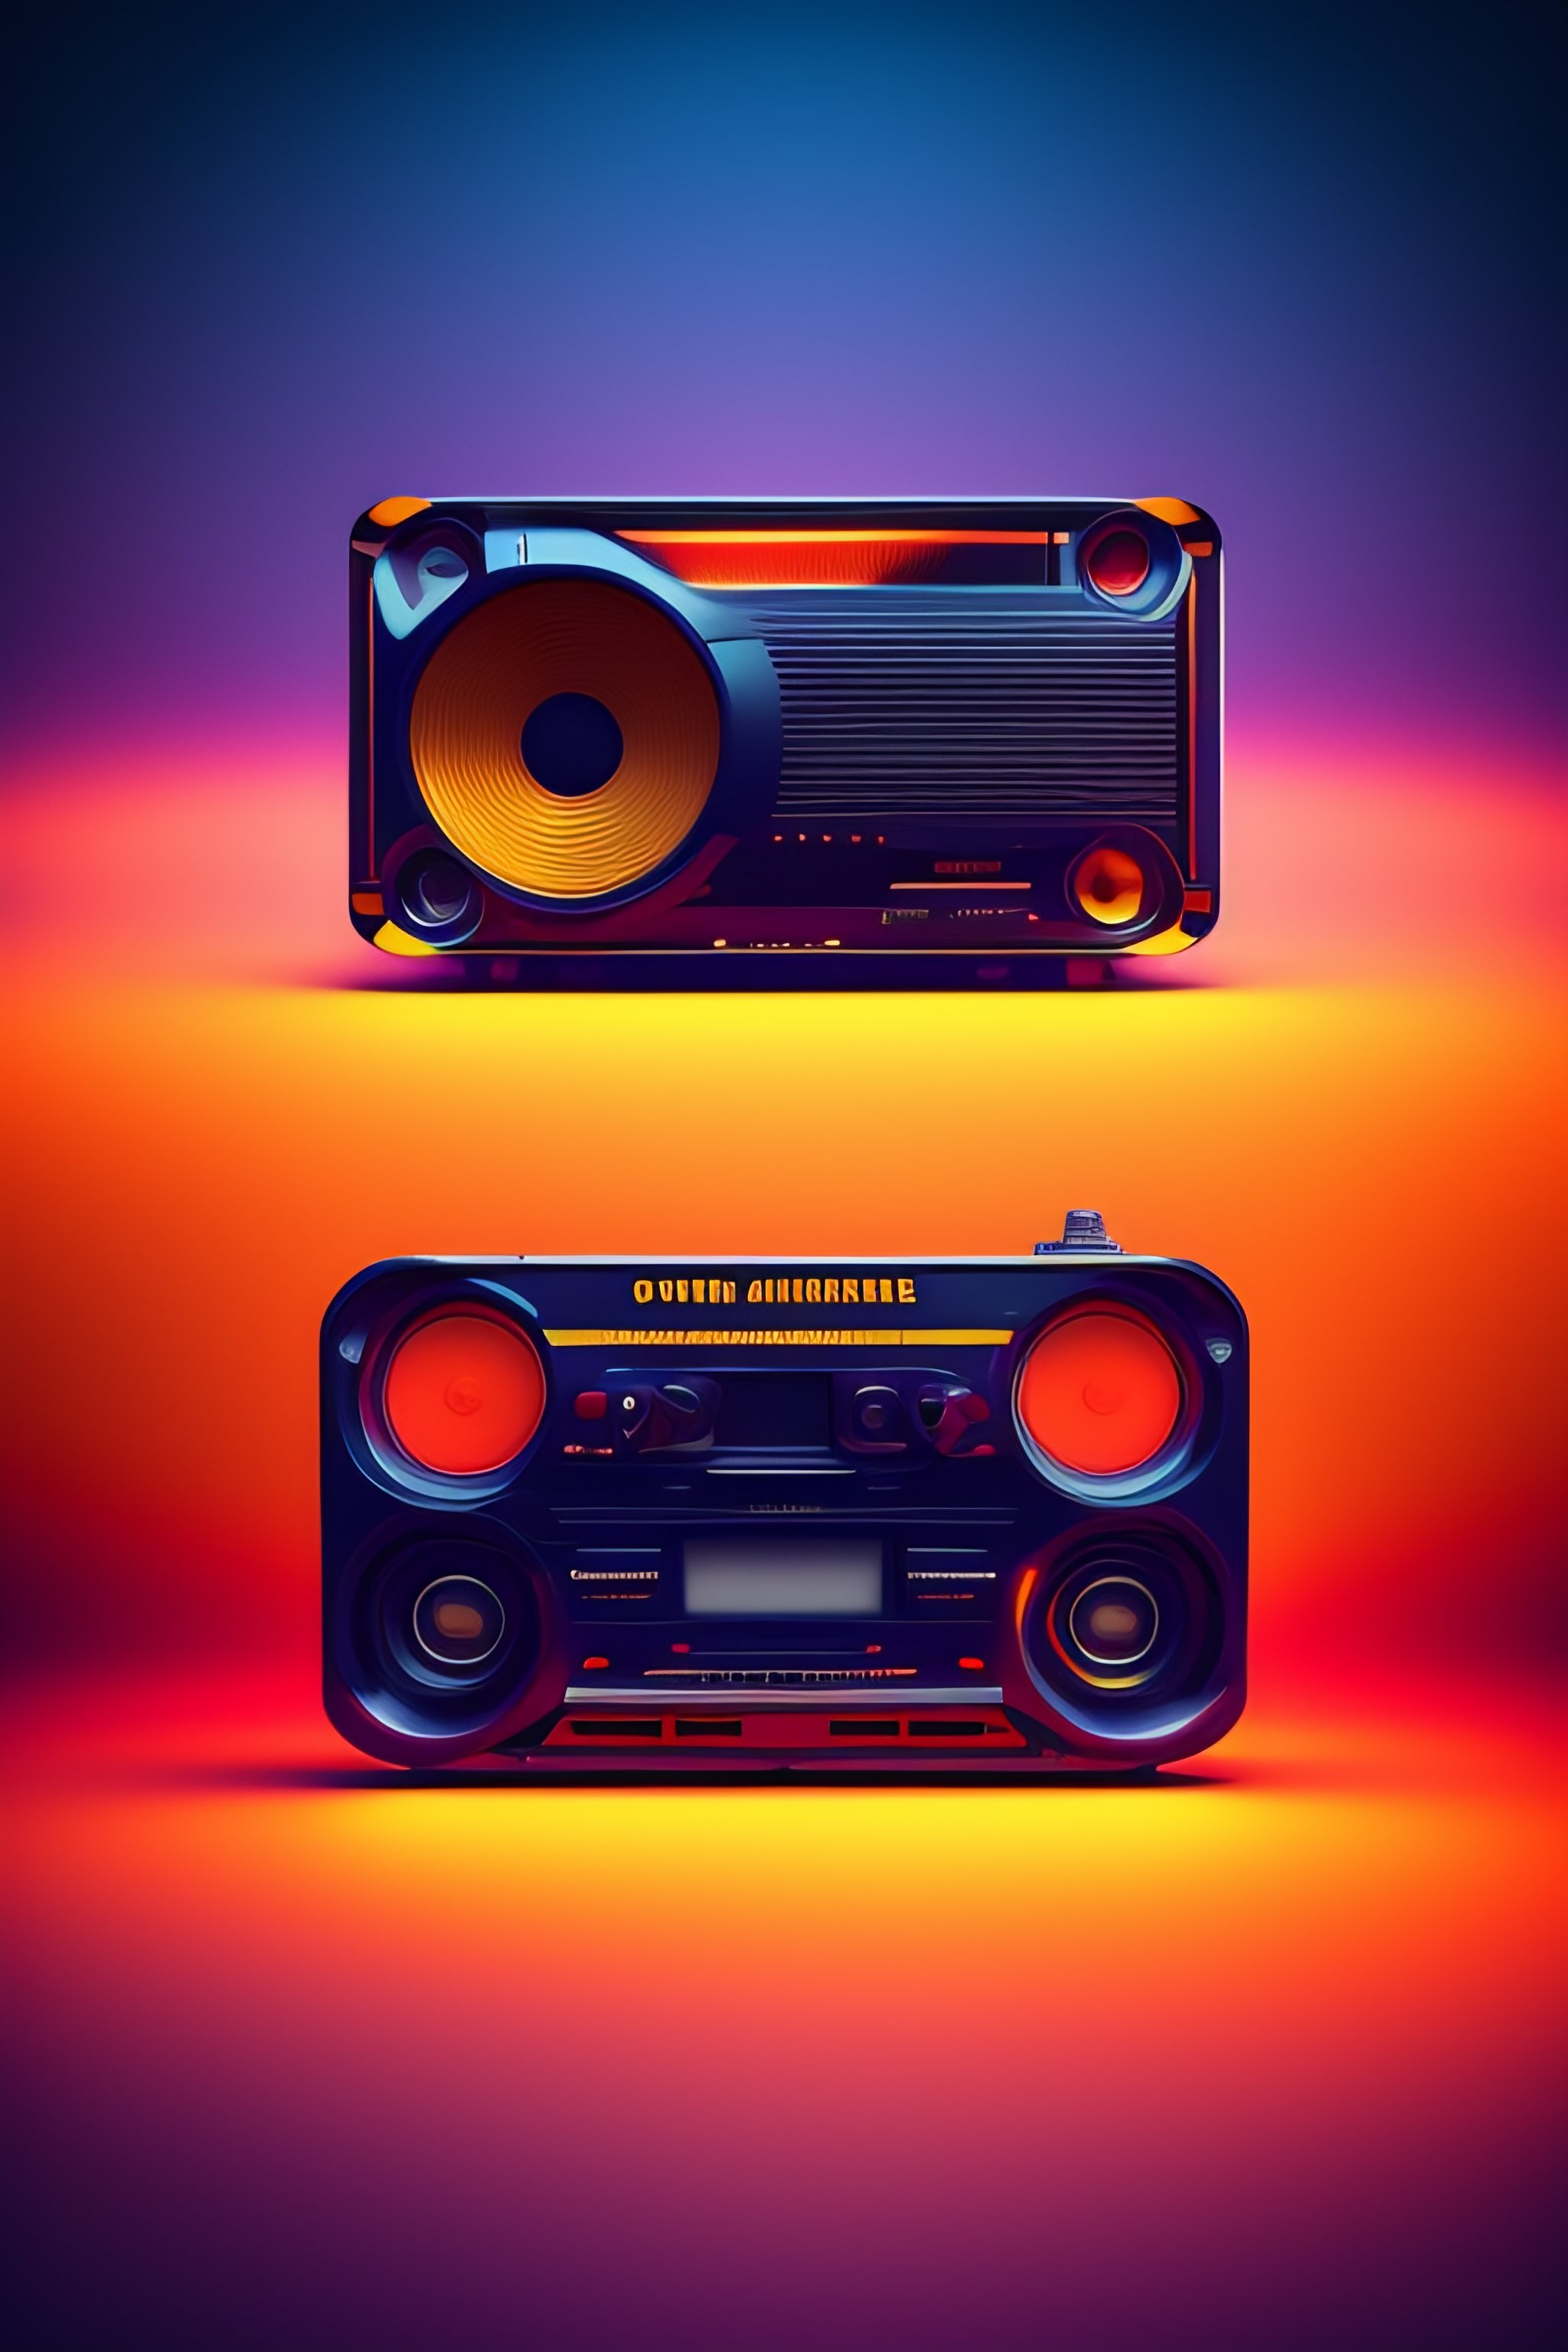 An old retro vintage radio, technology, music, retro Styled, old-fashioned  wallpaper